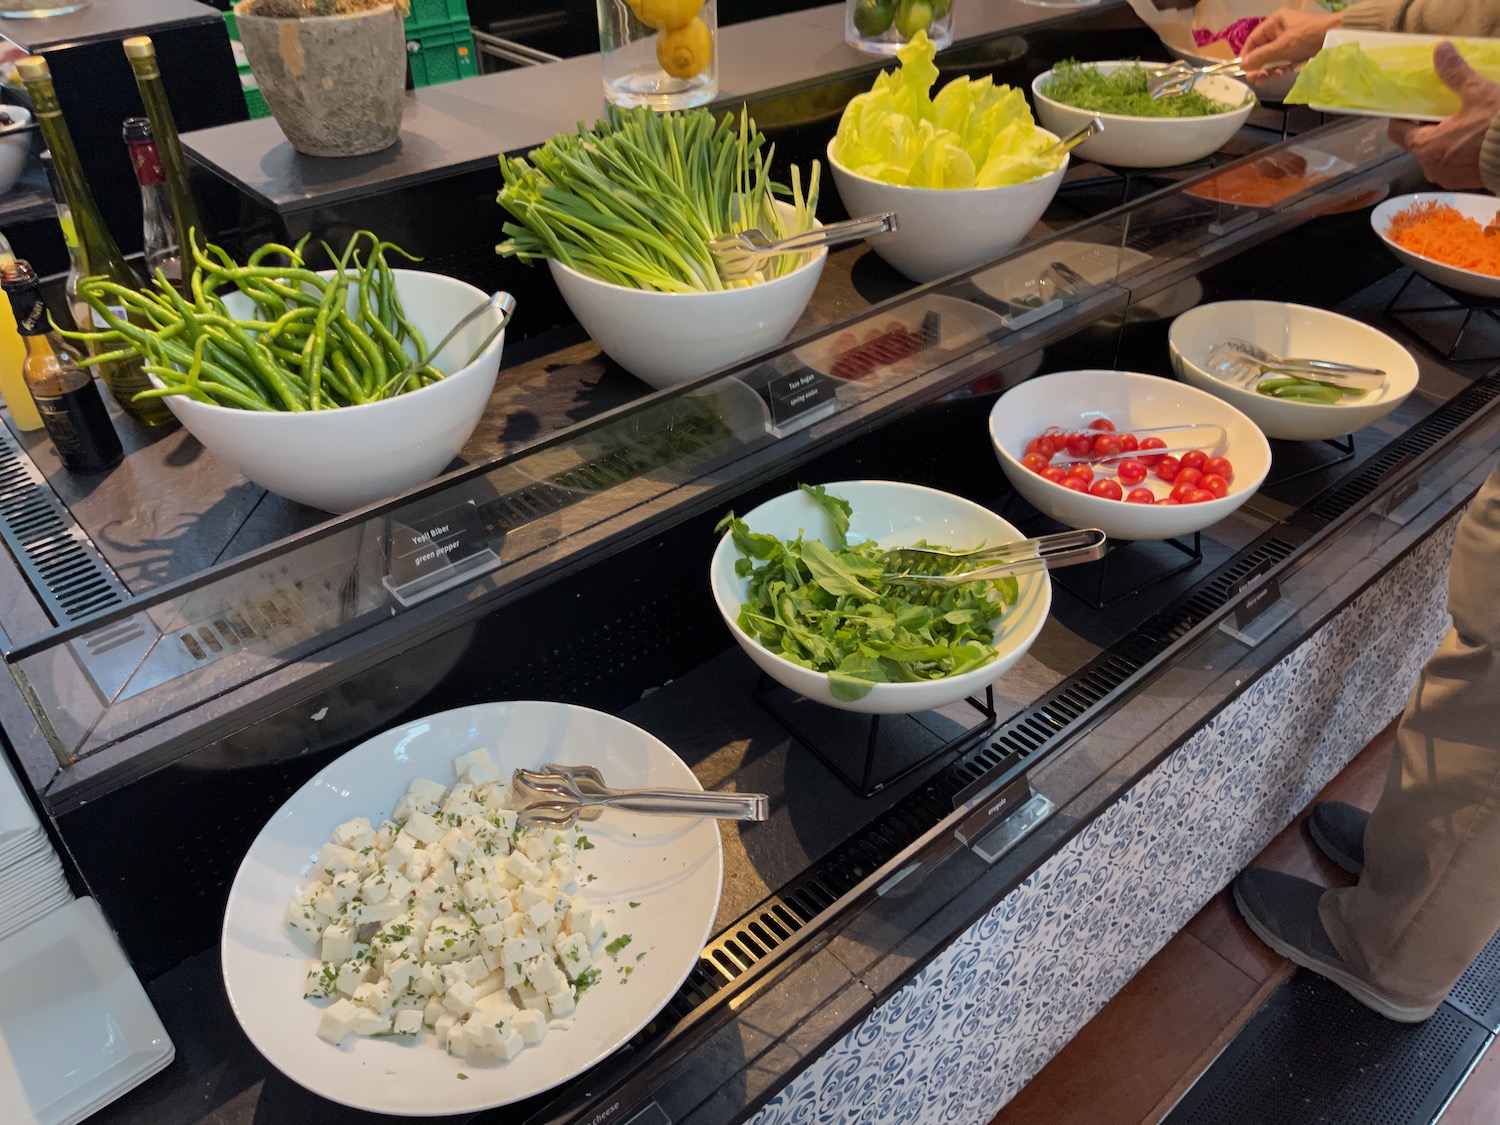 a salad bar with bowls of vegetables and greens